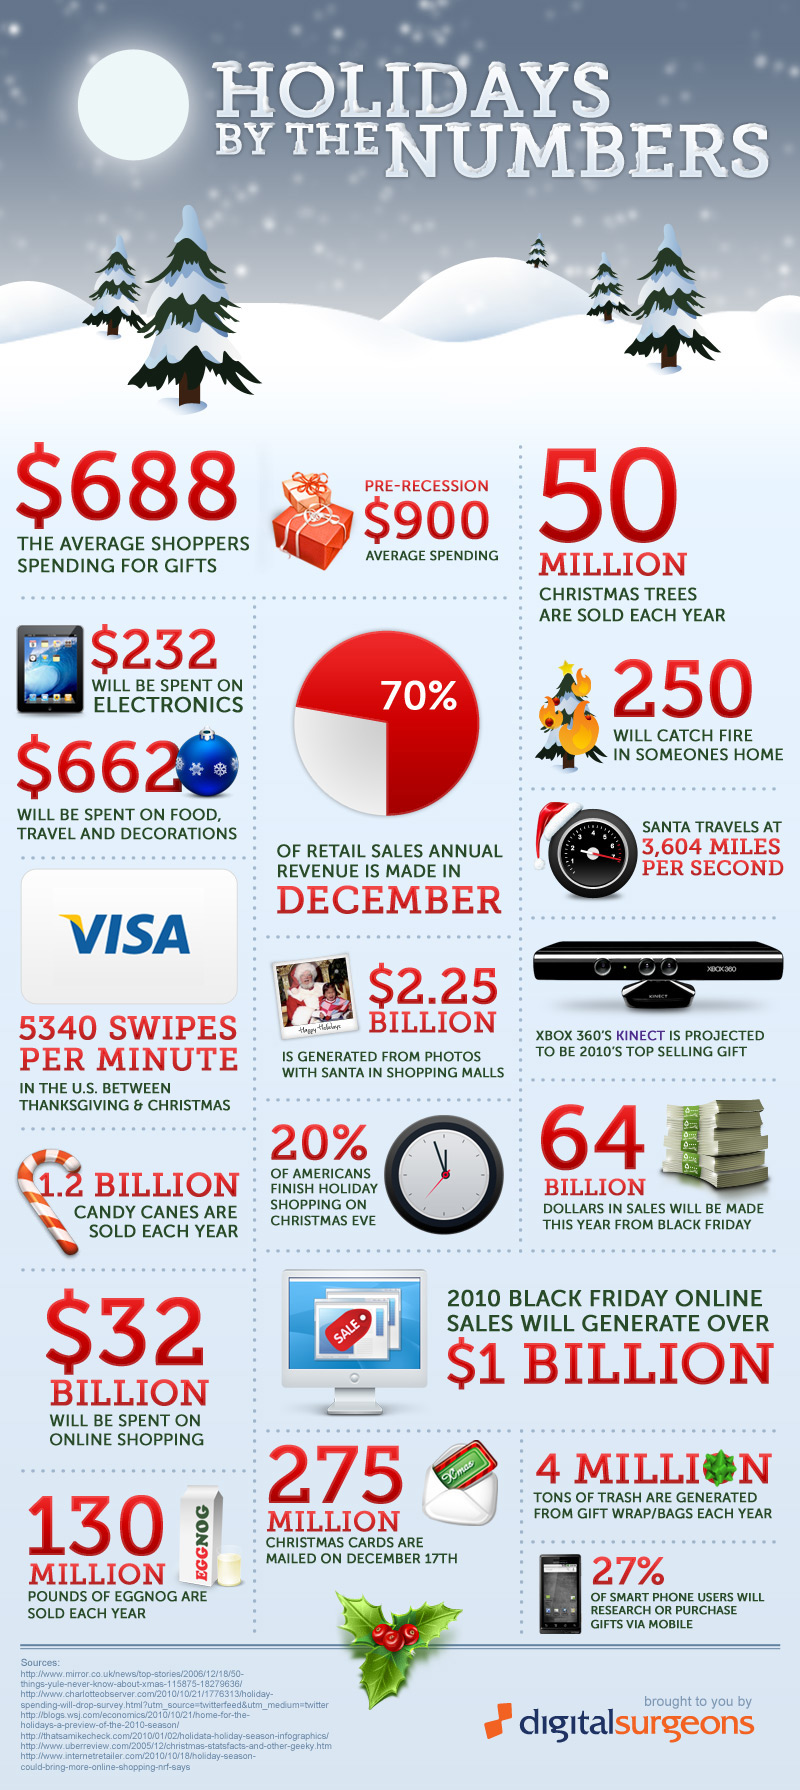 Holidays by the numbers